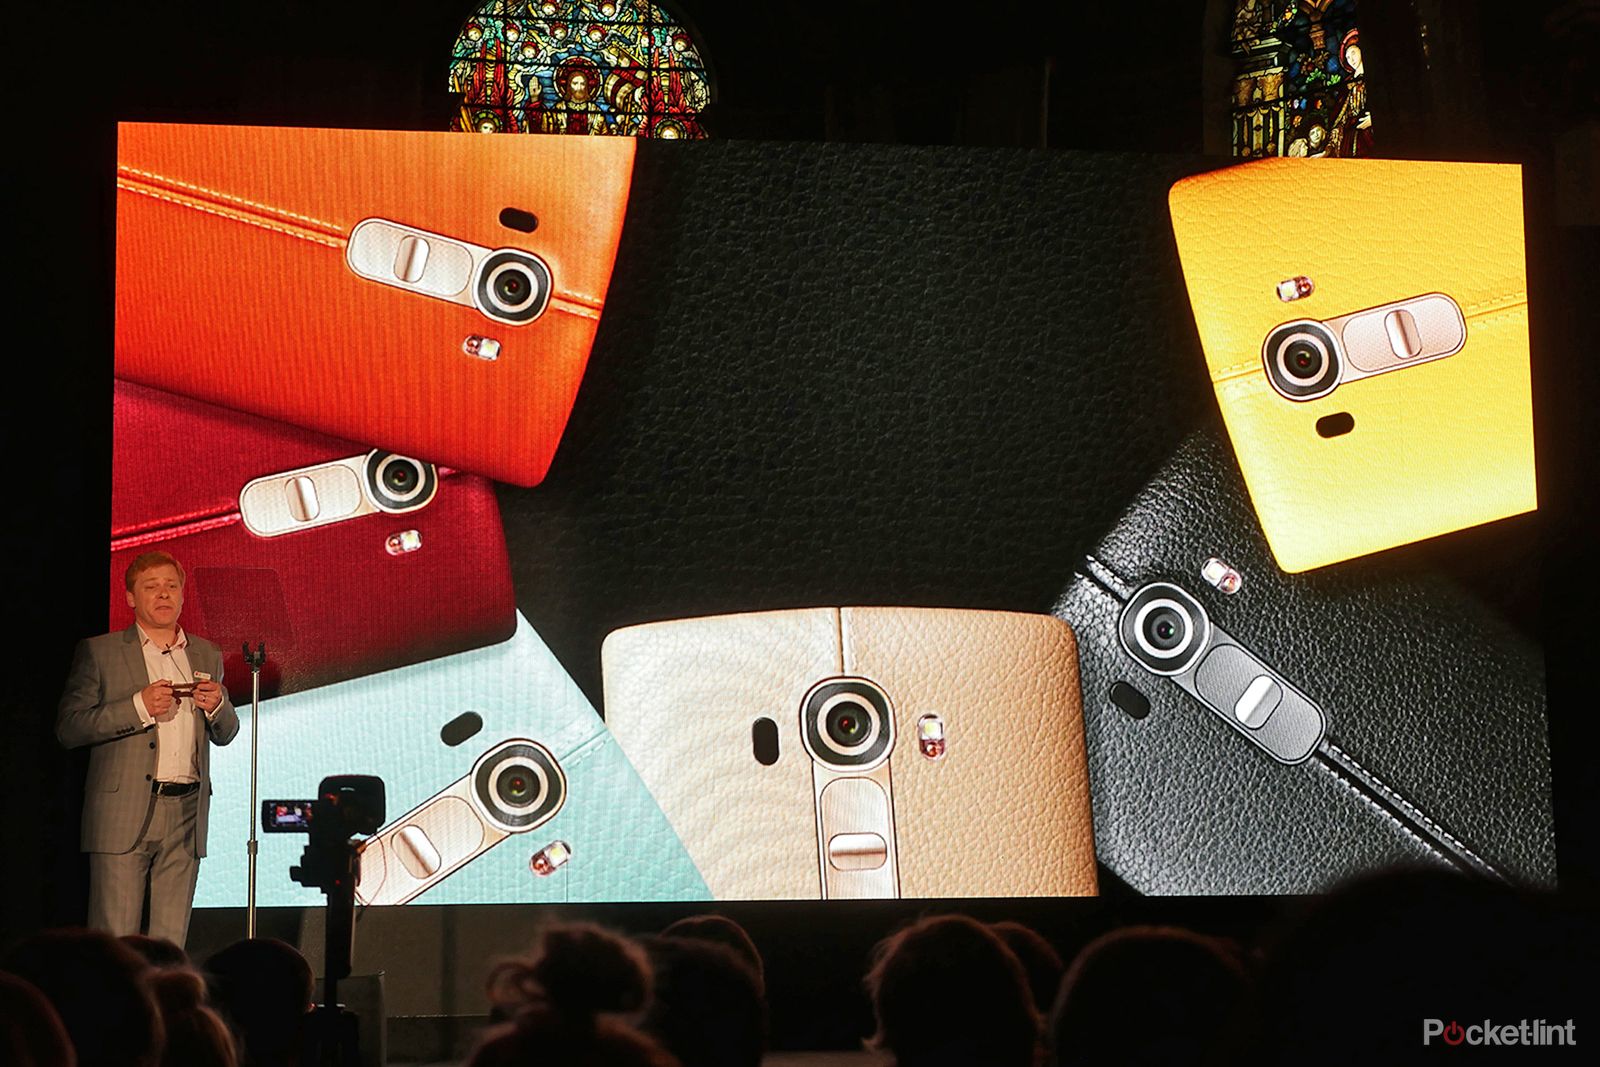 here s everything lg announced that you didn t already know about the g4 image 1